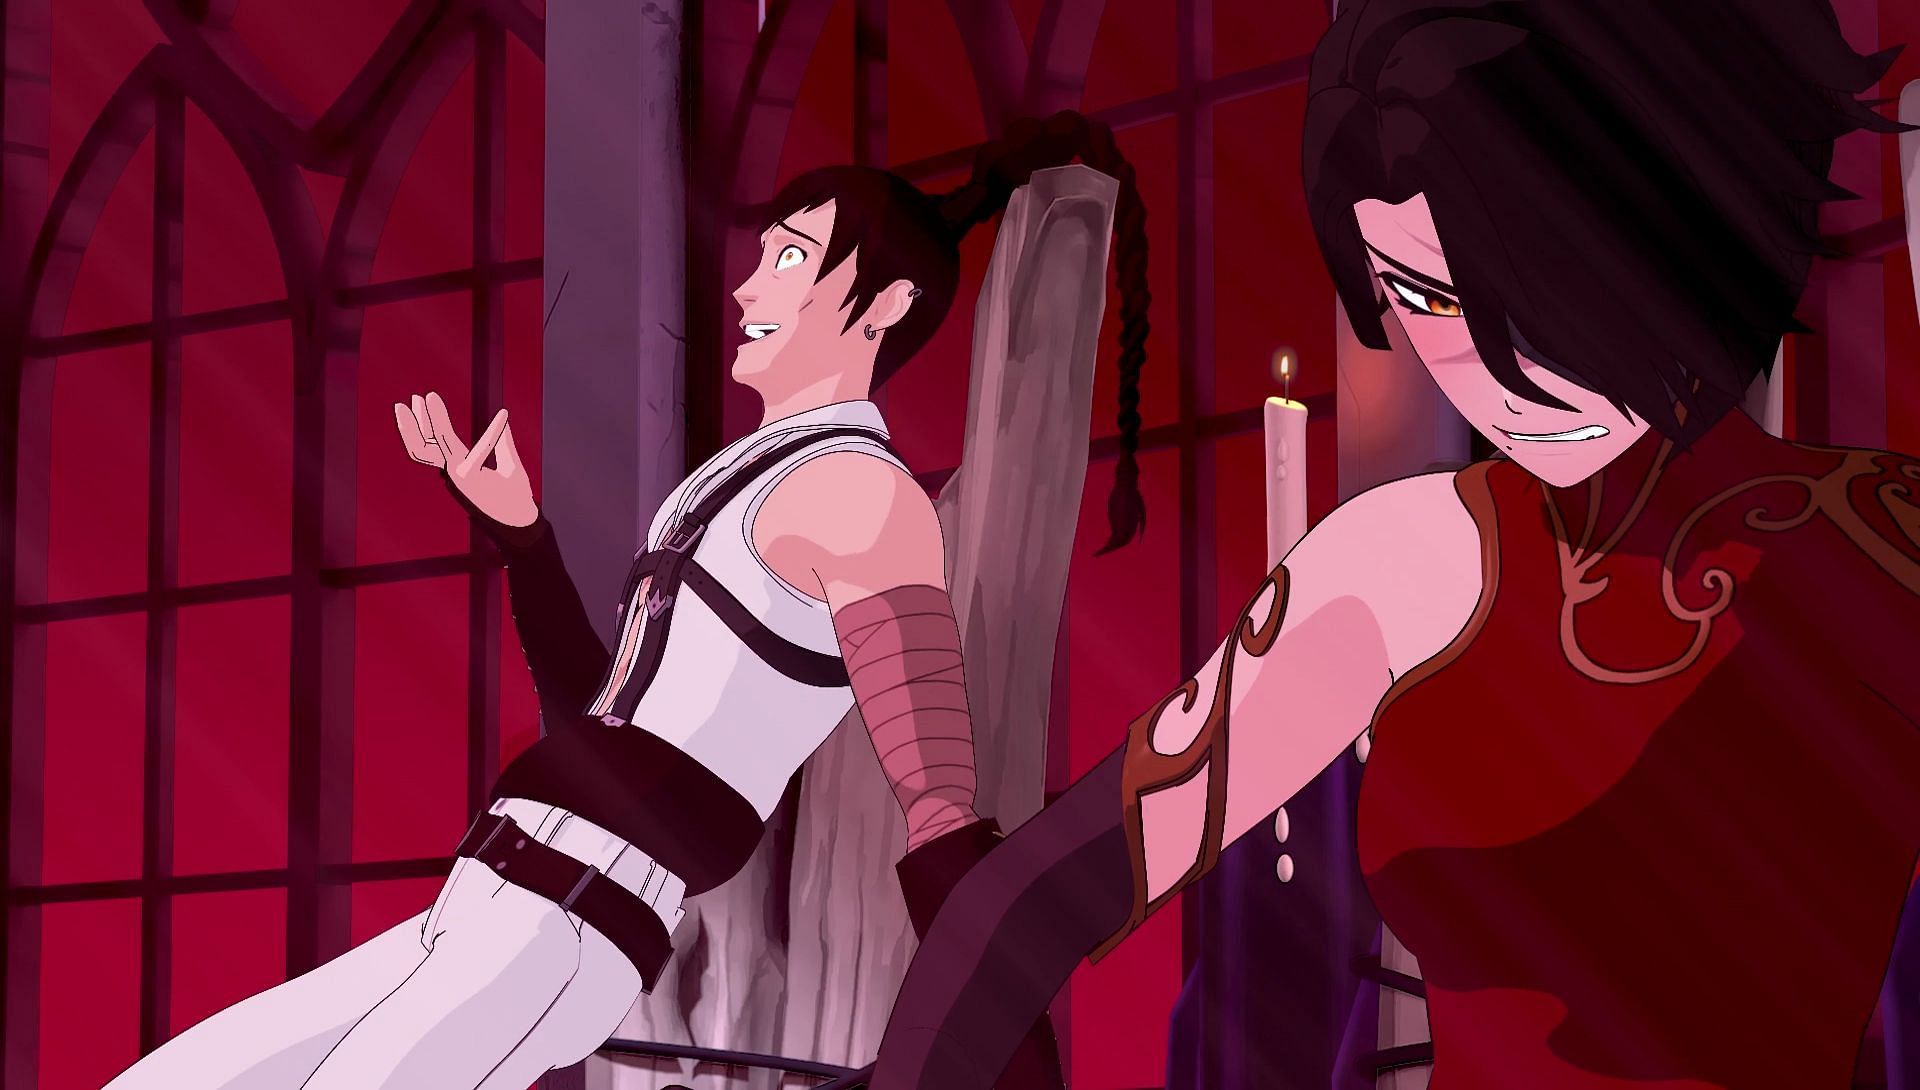 Tyrian Callows (left), laughing madly next to Cinder Fall (right), is an unhinged antagonist (Image via Rooster Teeth)